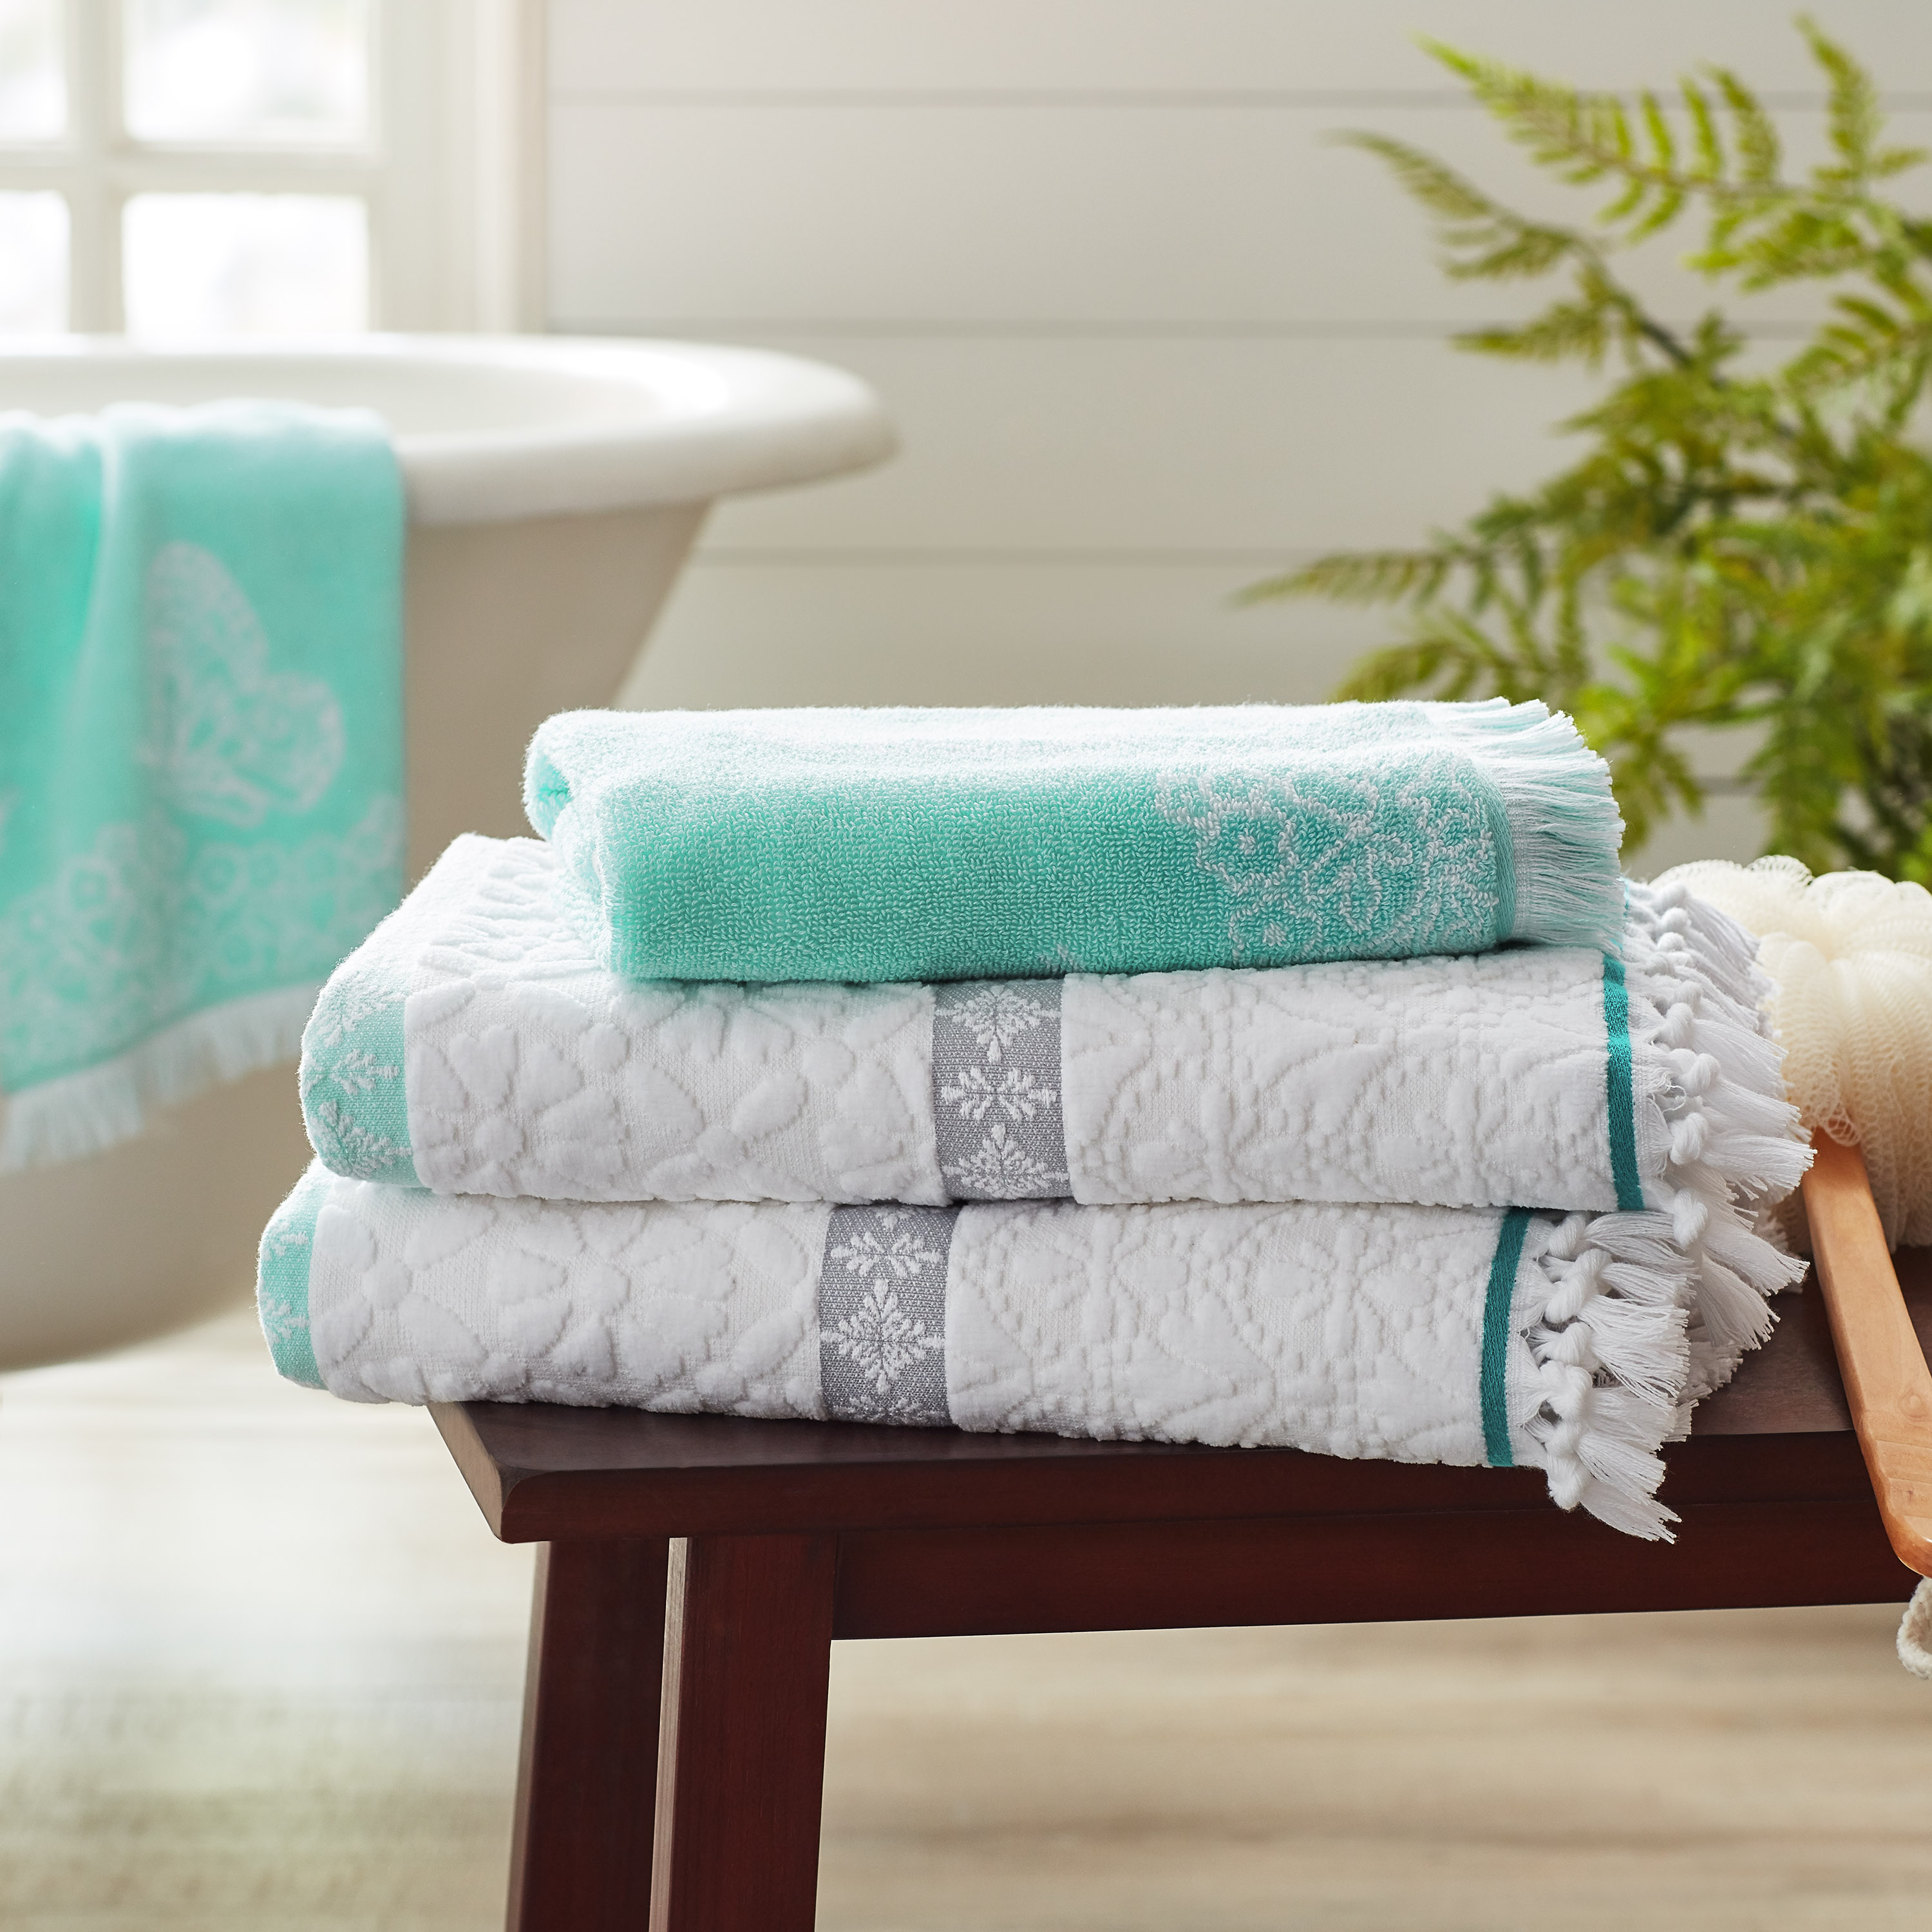 The Pioneer Woman 4 Piece Cotton Bath Towel Set, Soft Silver - image 5 of 5